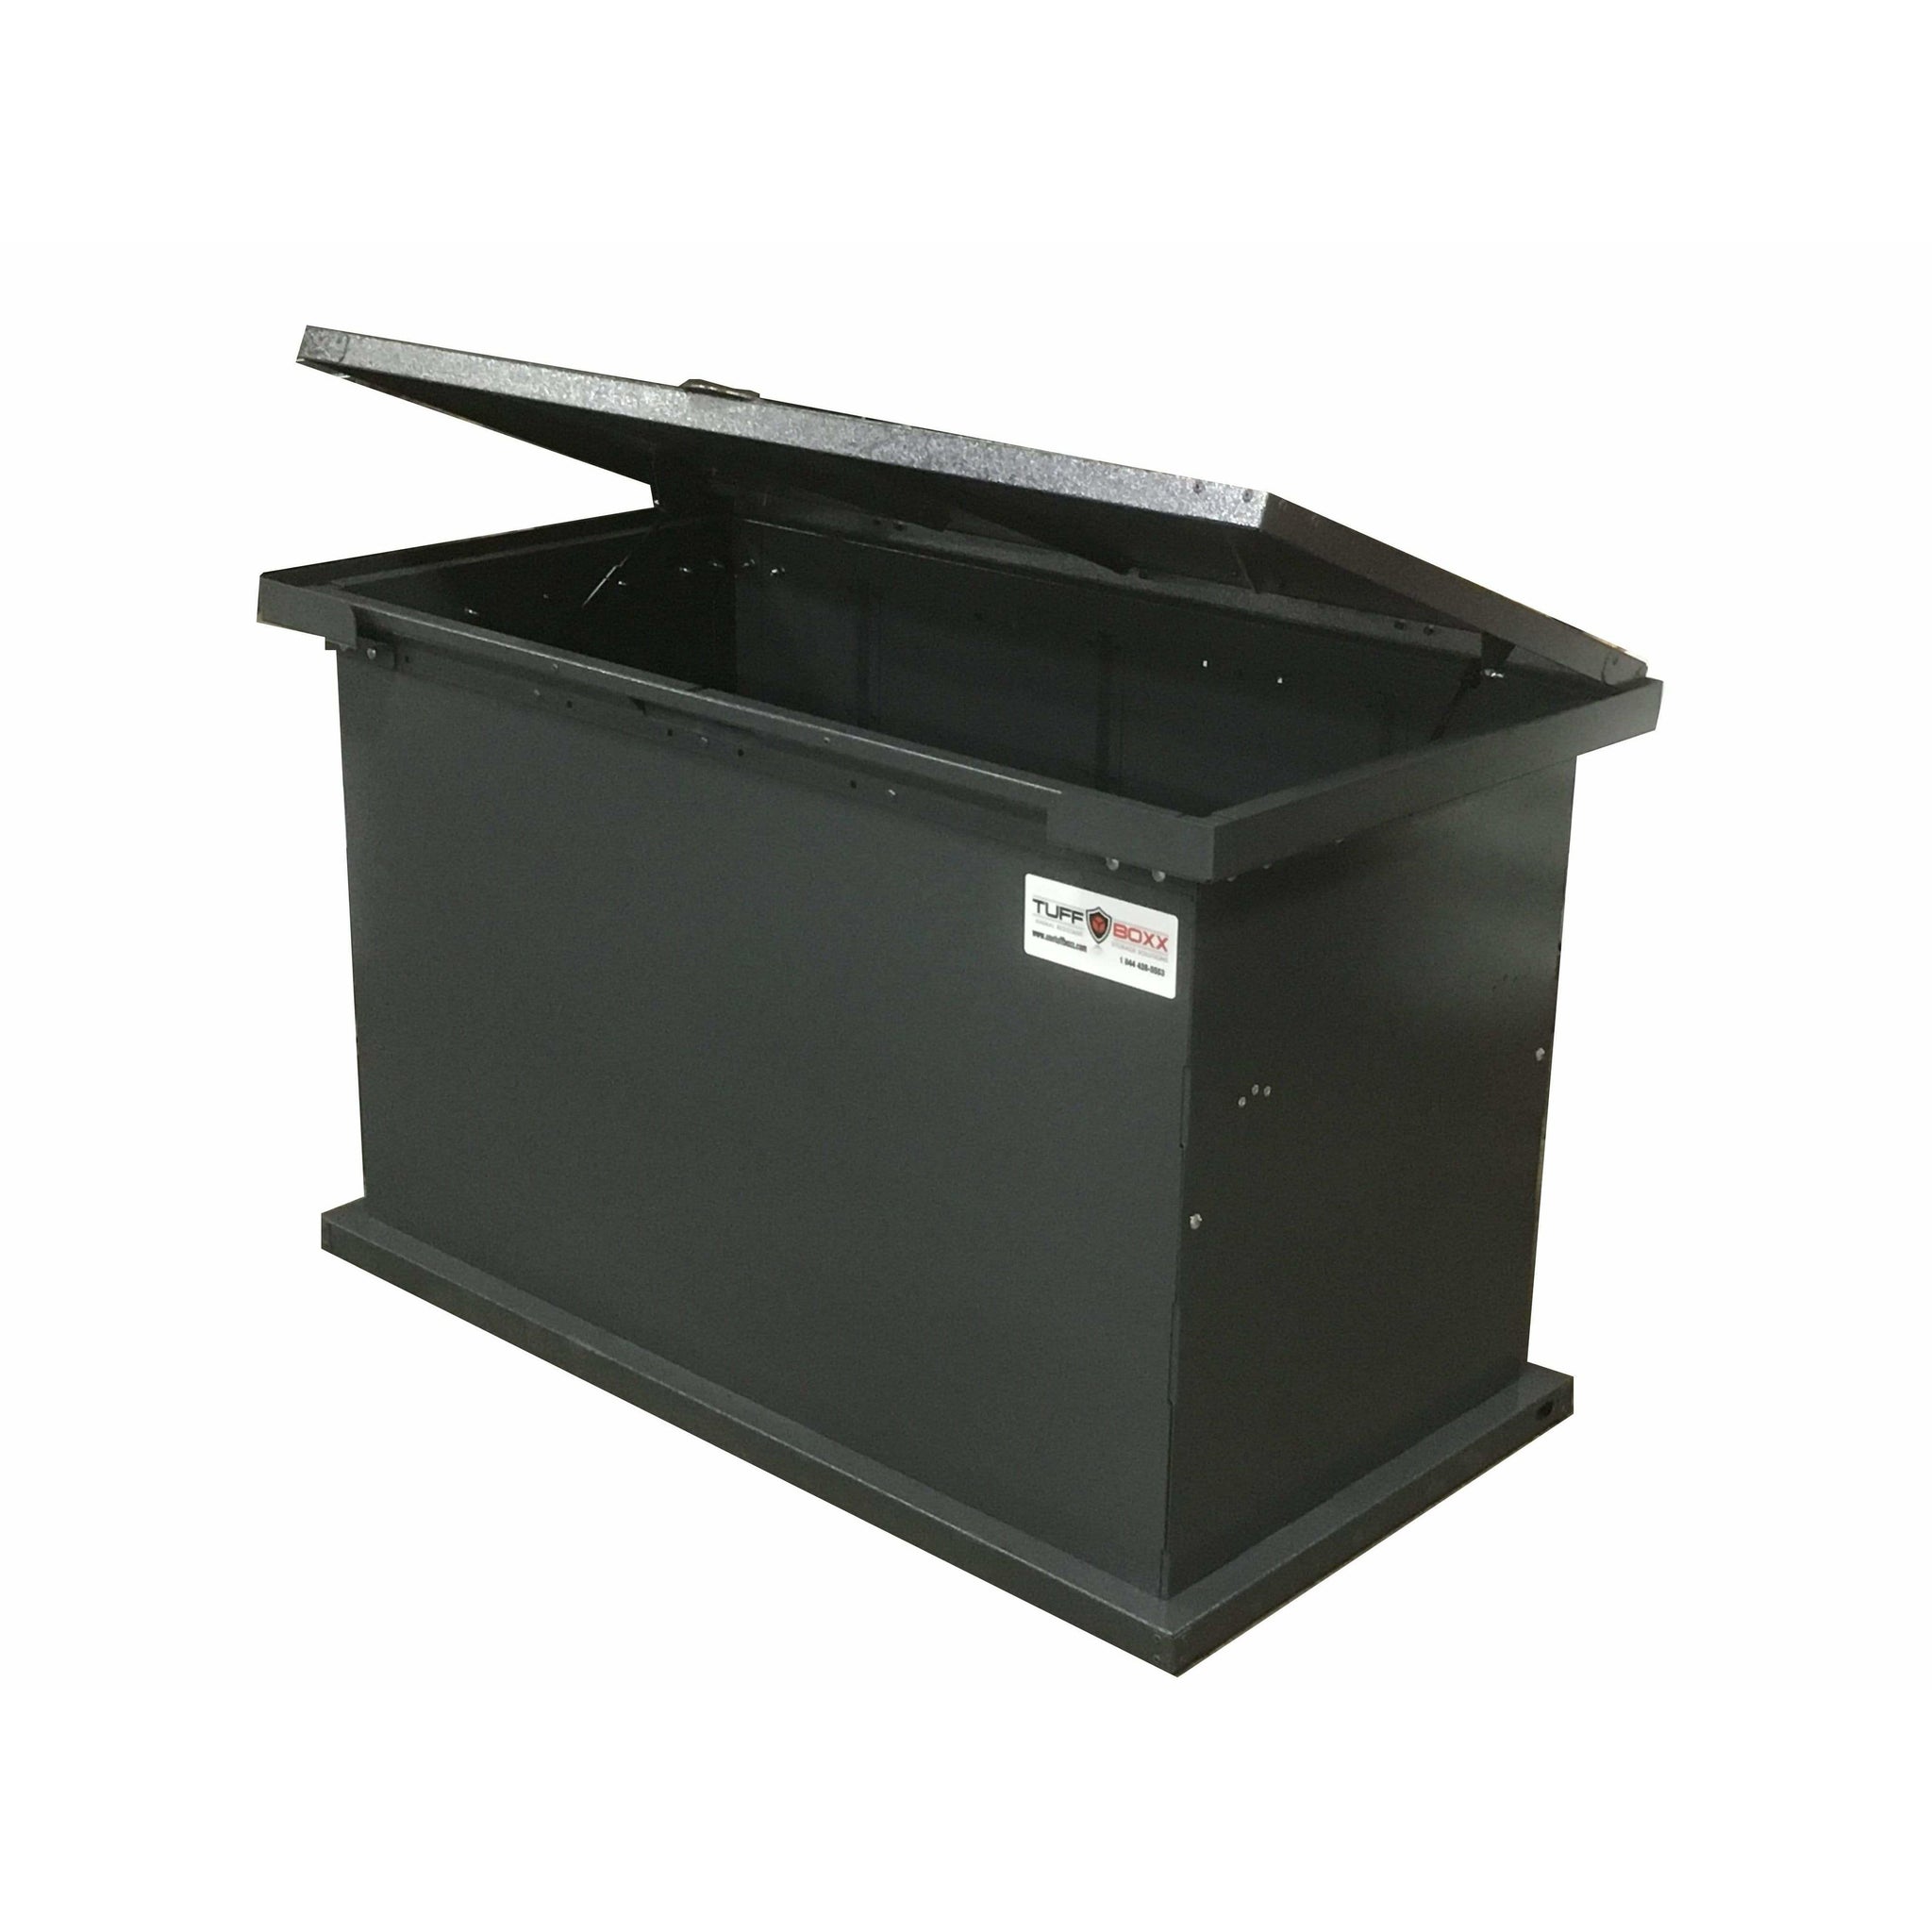 TuffBoxx Grizzly Animal Resistant 197-Gallon Steel Trash Receptacle